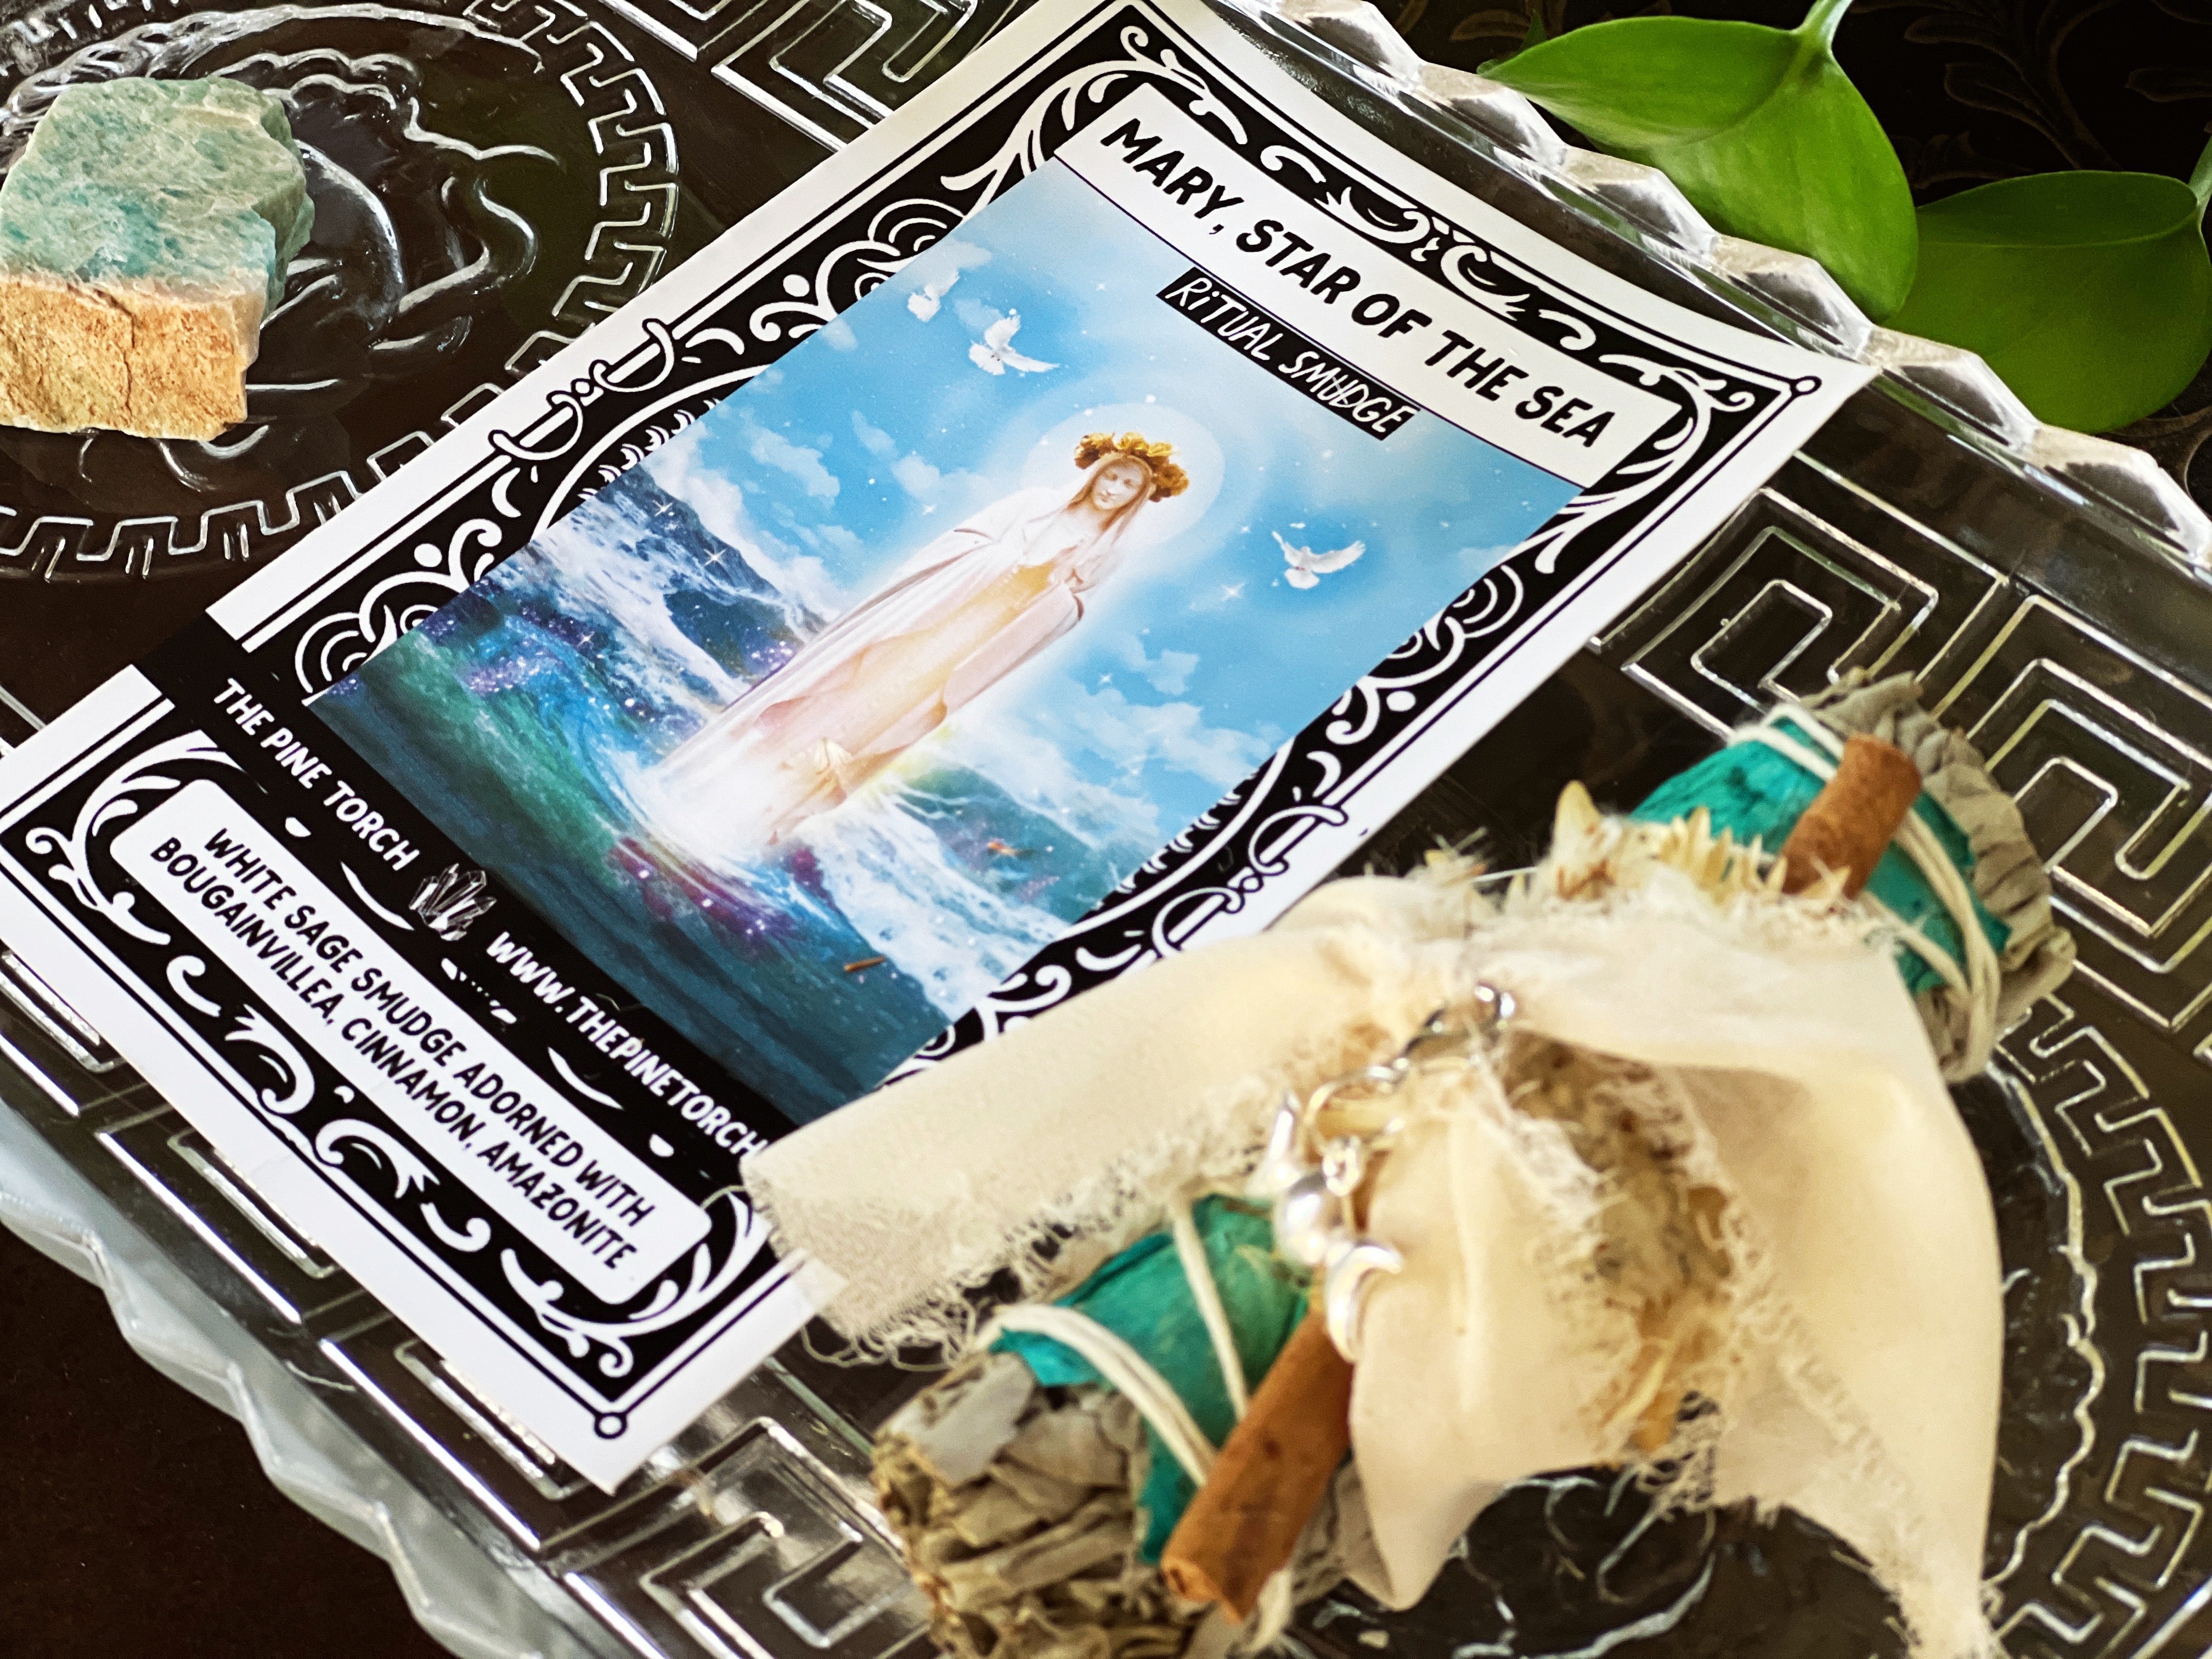 MARY, STAR OF THE SEA << DELUXE RITUAL BOX >>